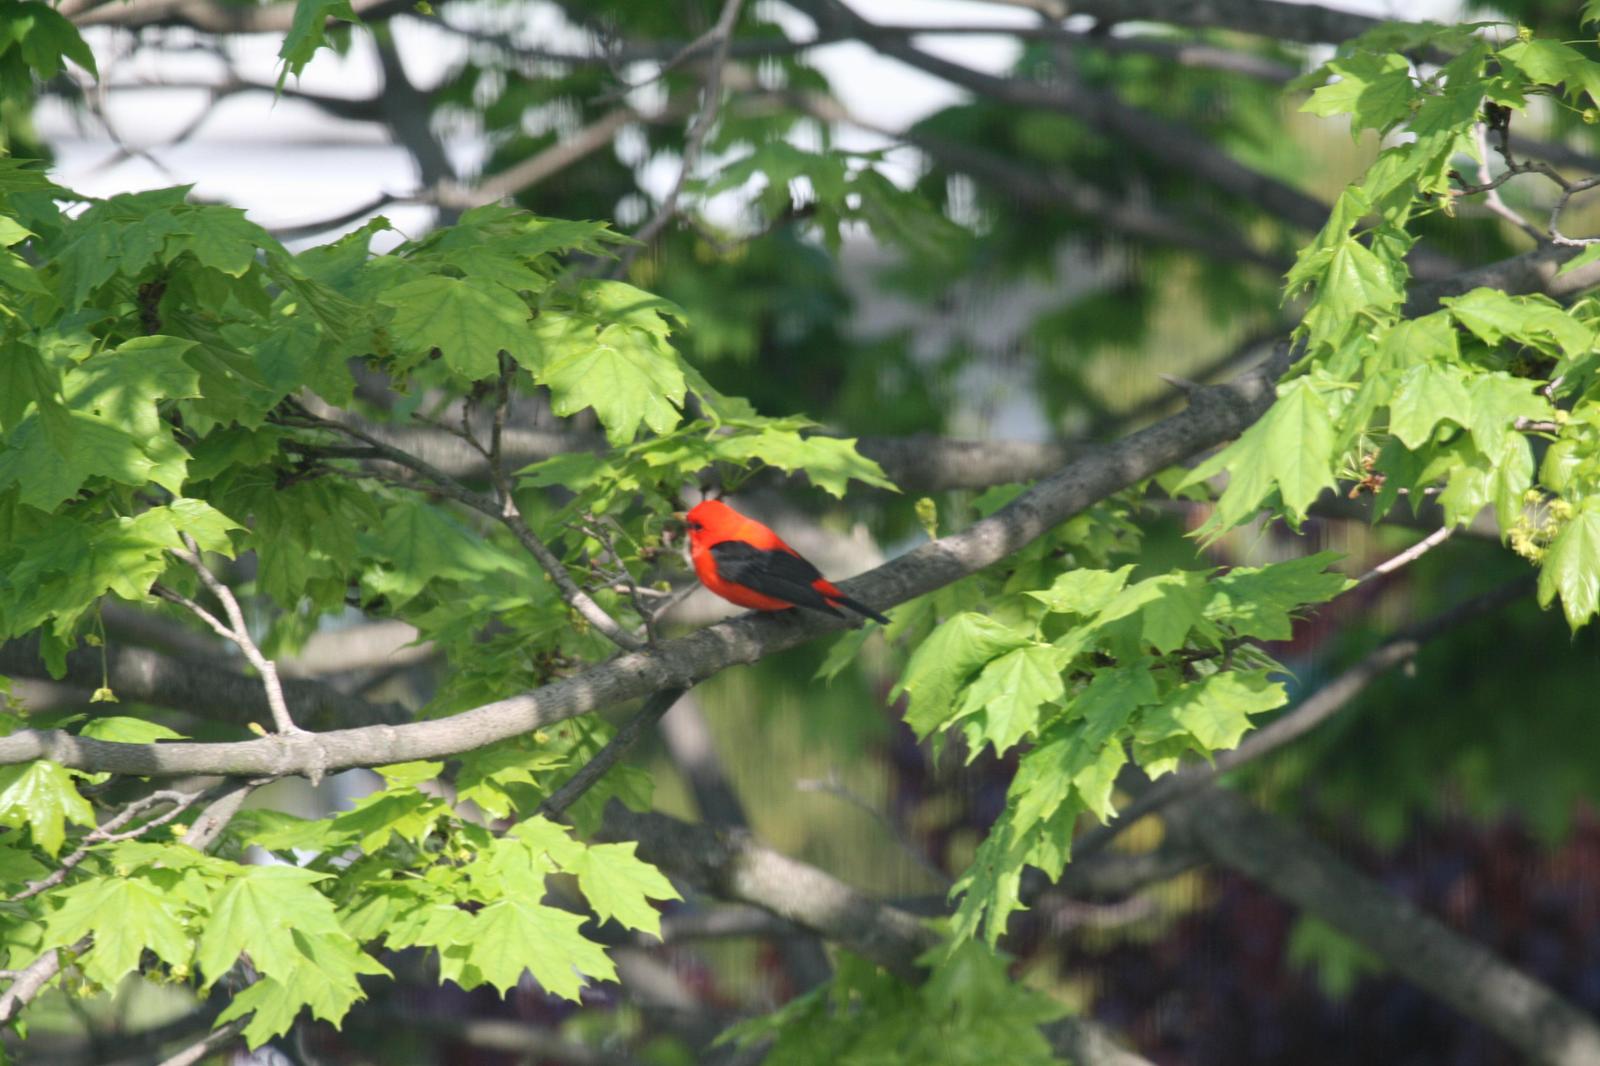 Scarlet Tanager Photo by Roseanne CALECA